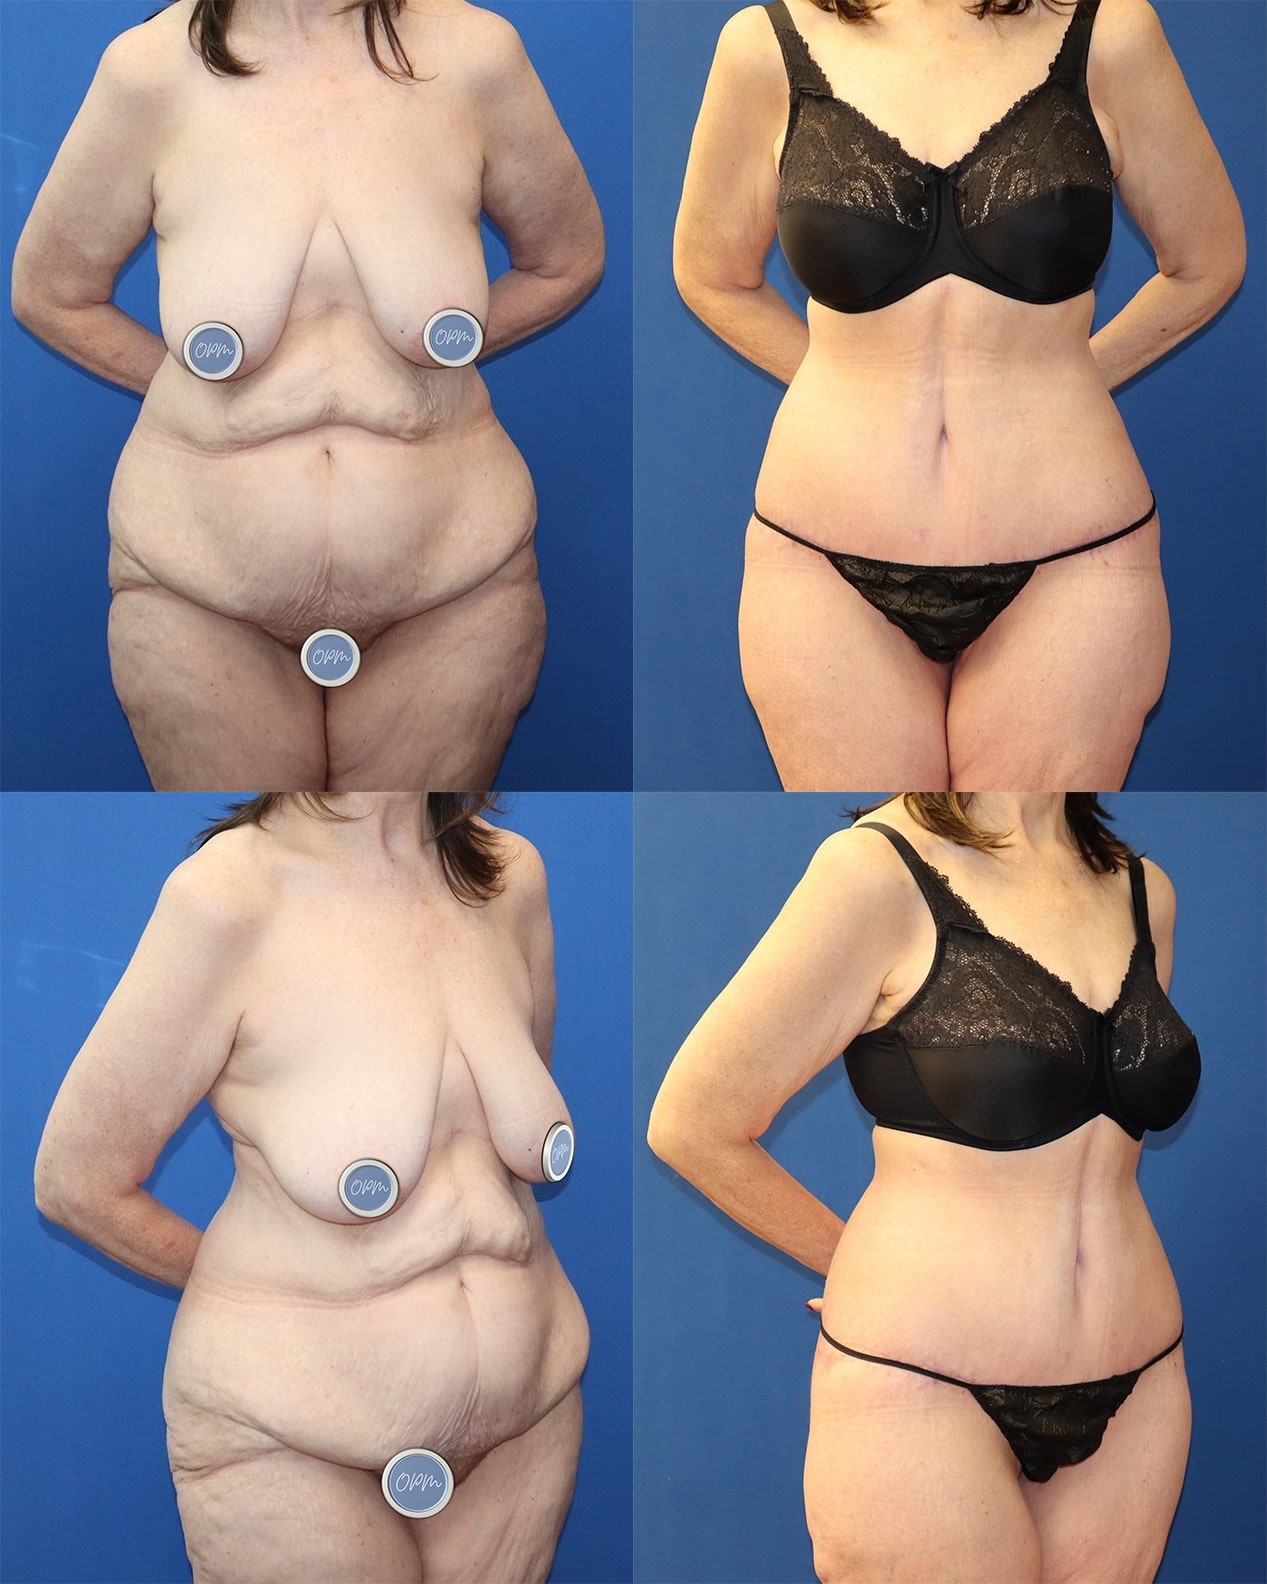 Successful Tummy Tuck Procedure: Before and after pictures of a female client in Houston, showcasing the transformative results of the procedure.